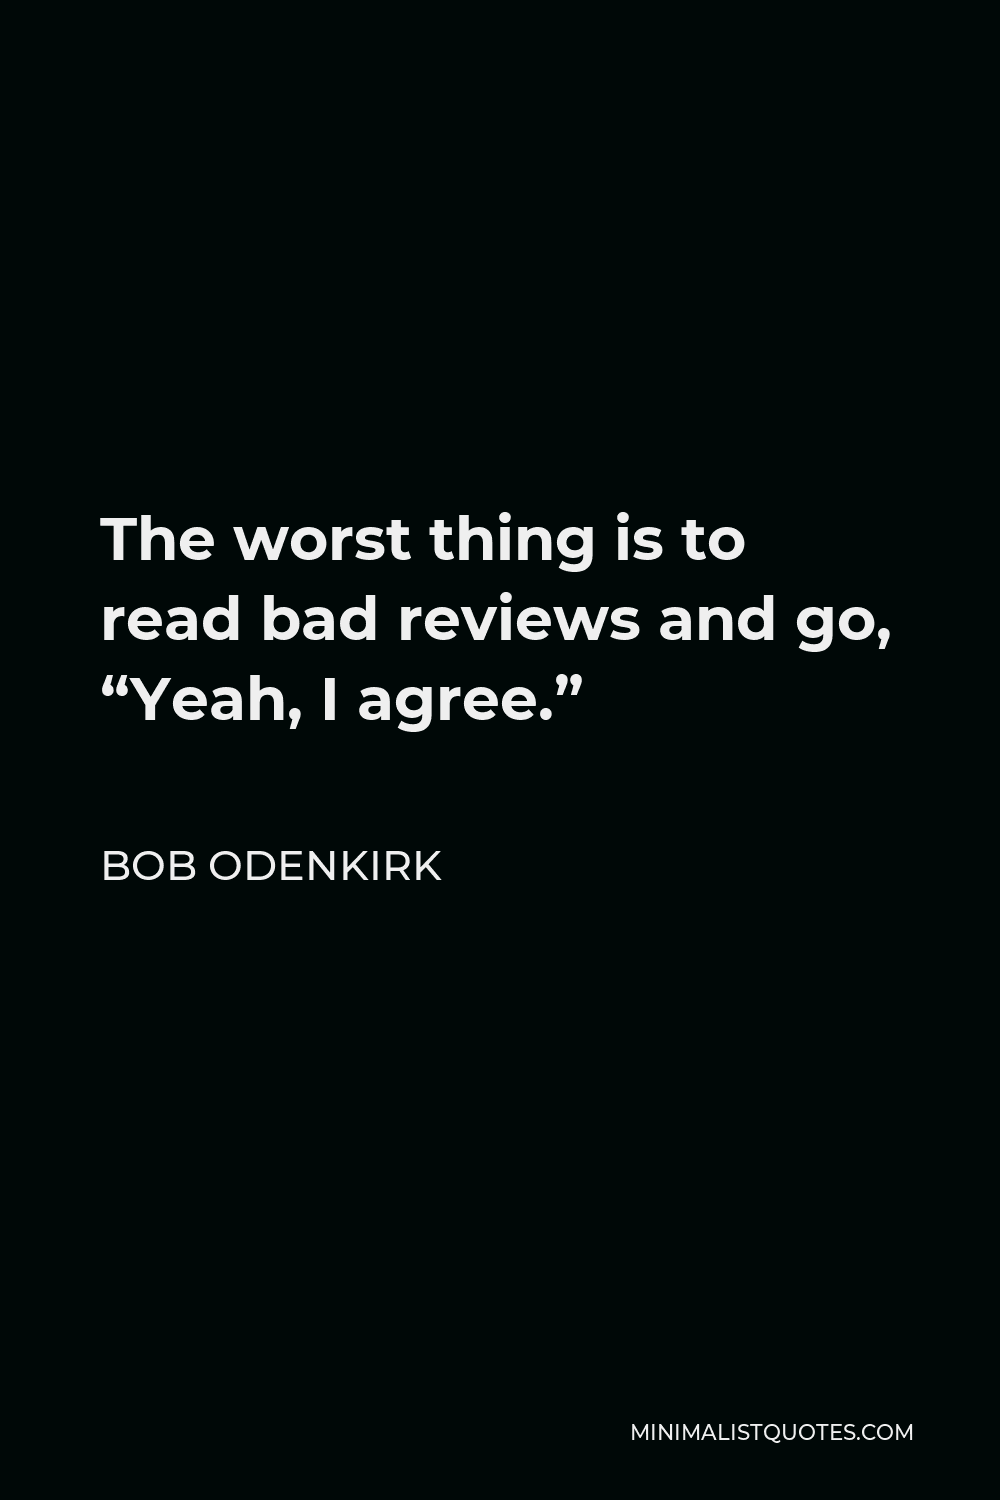 Bob Odenkirk Quote - The worst thing is to read bad reviews and go, “Yeah, I agree.”